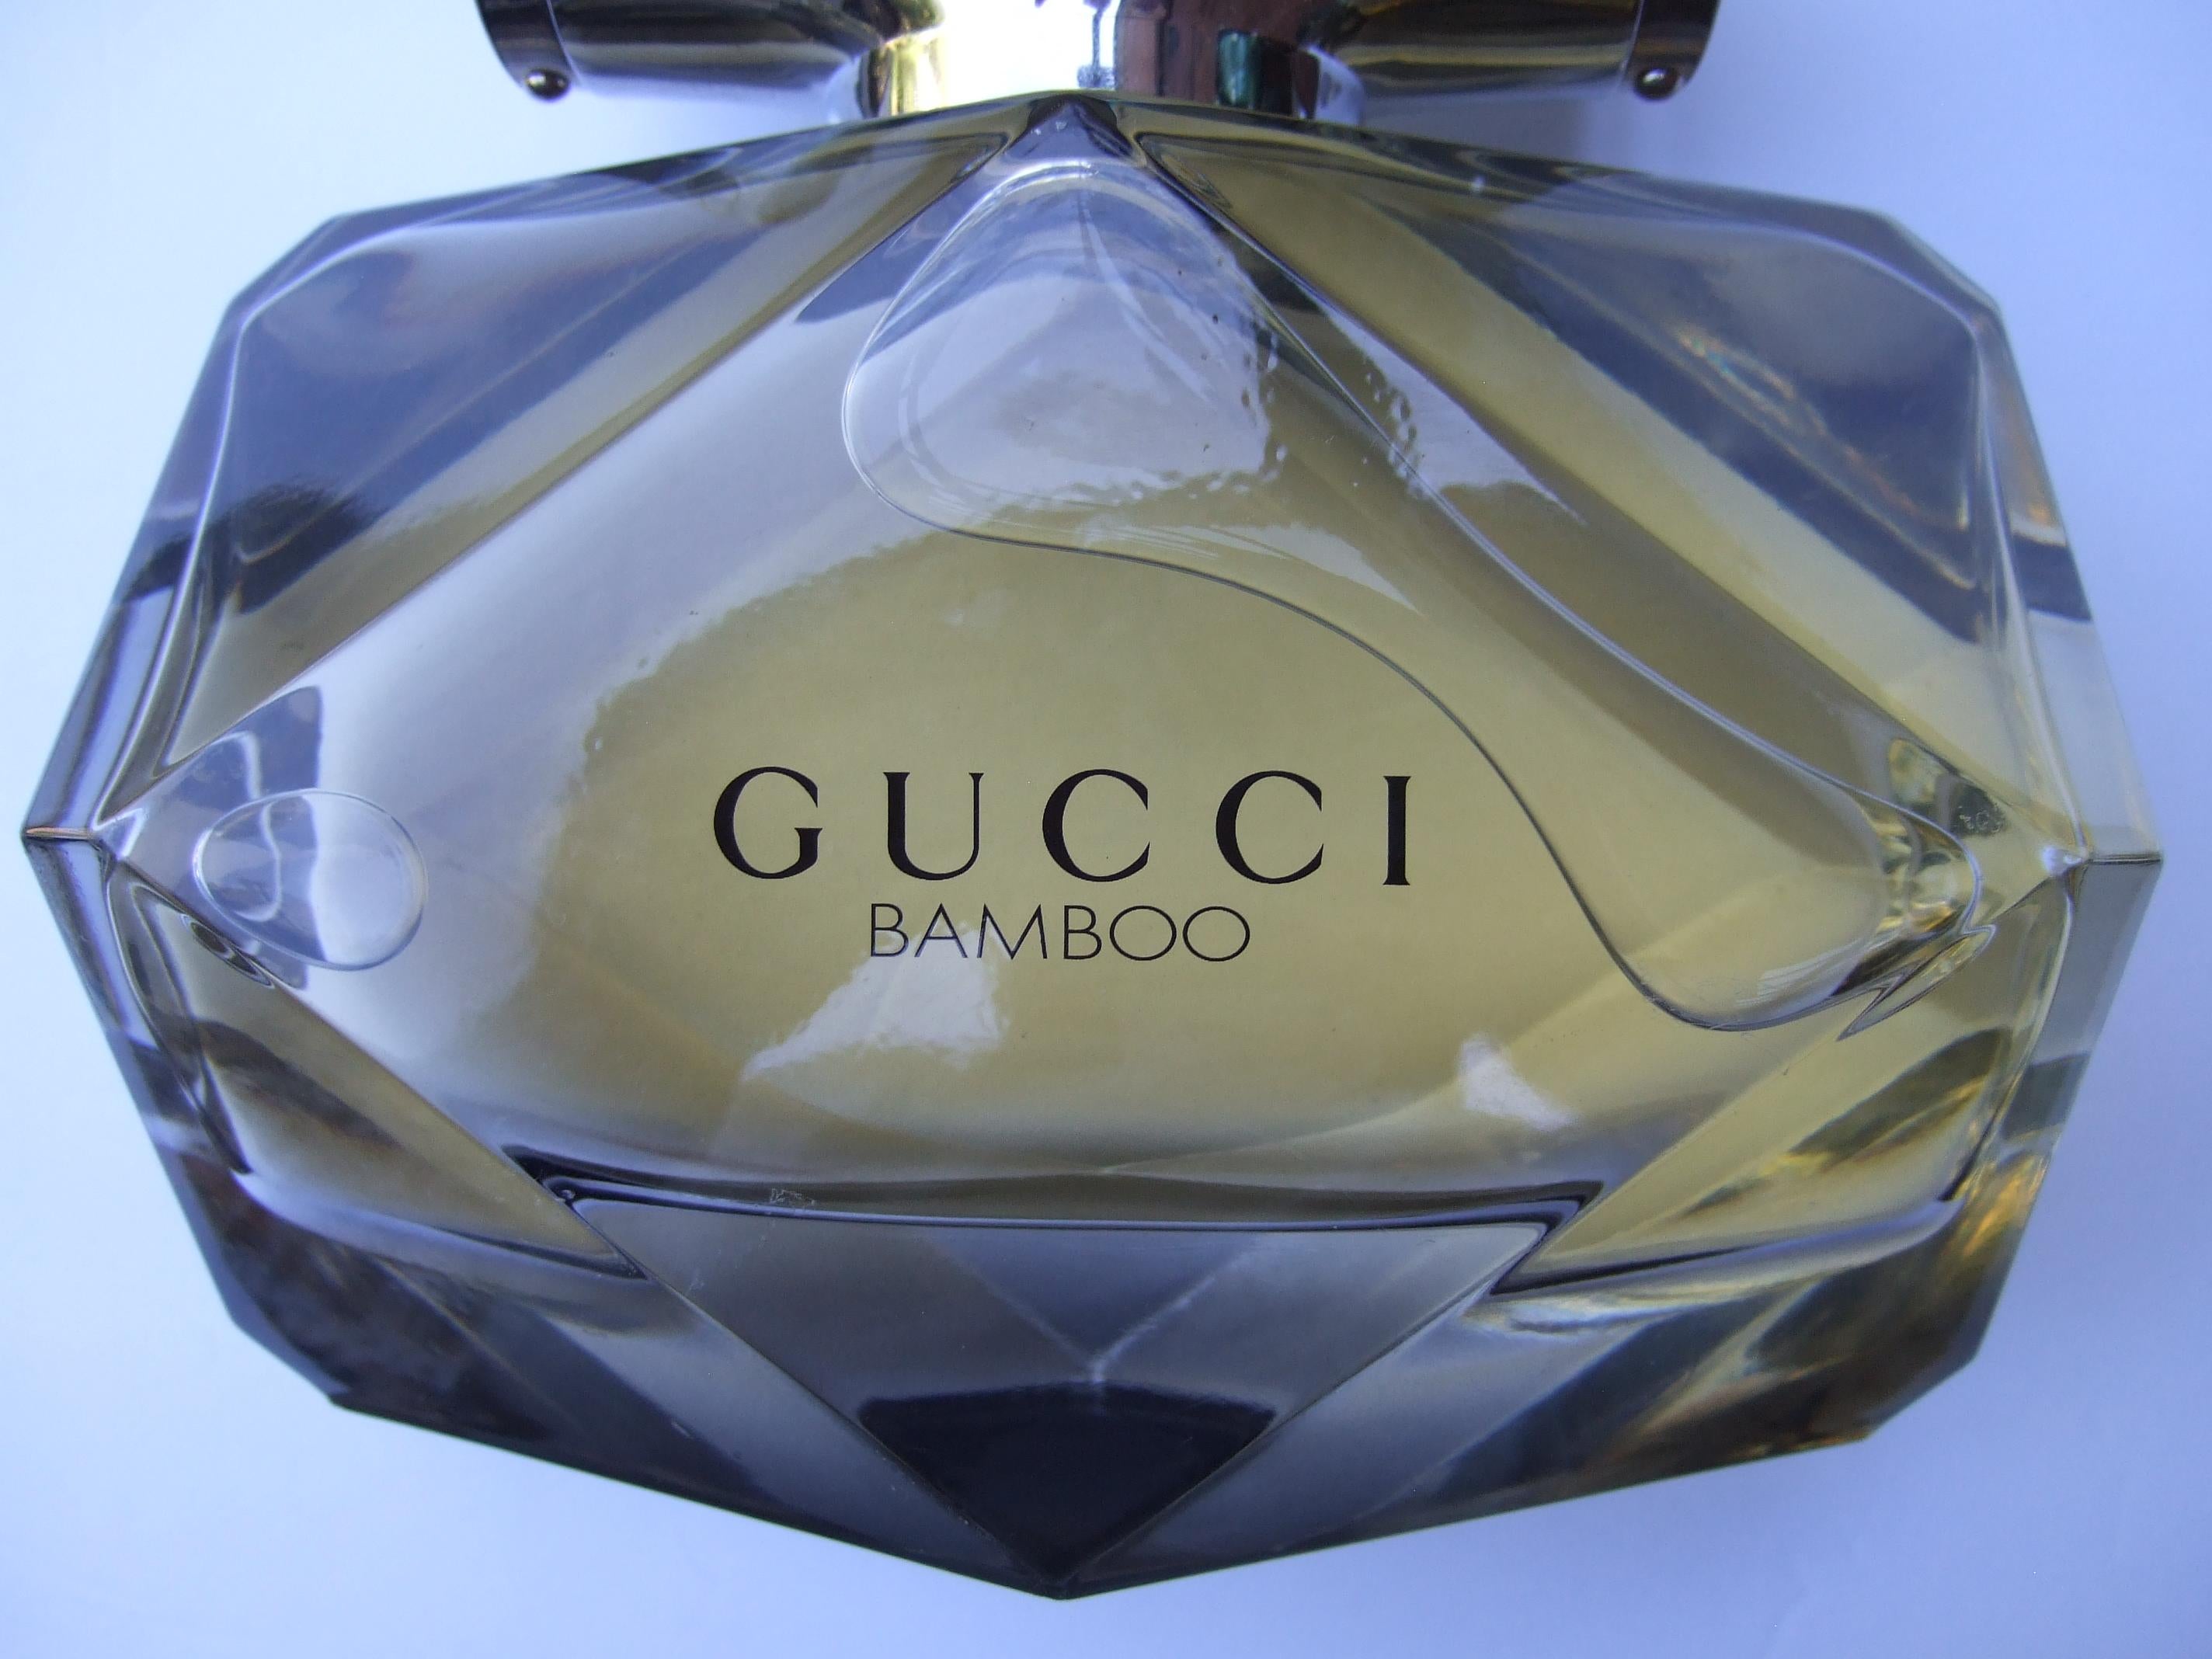 Gray Gucci Bamboo Huge Glass Factice Faceted Display Decorative Bottle c 21st c  For Sale